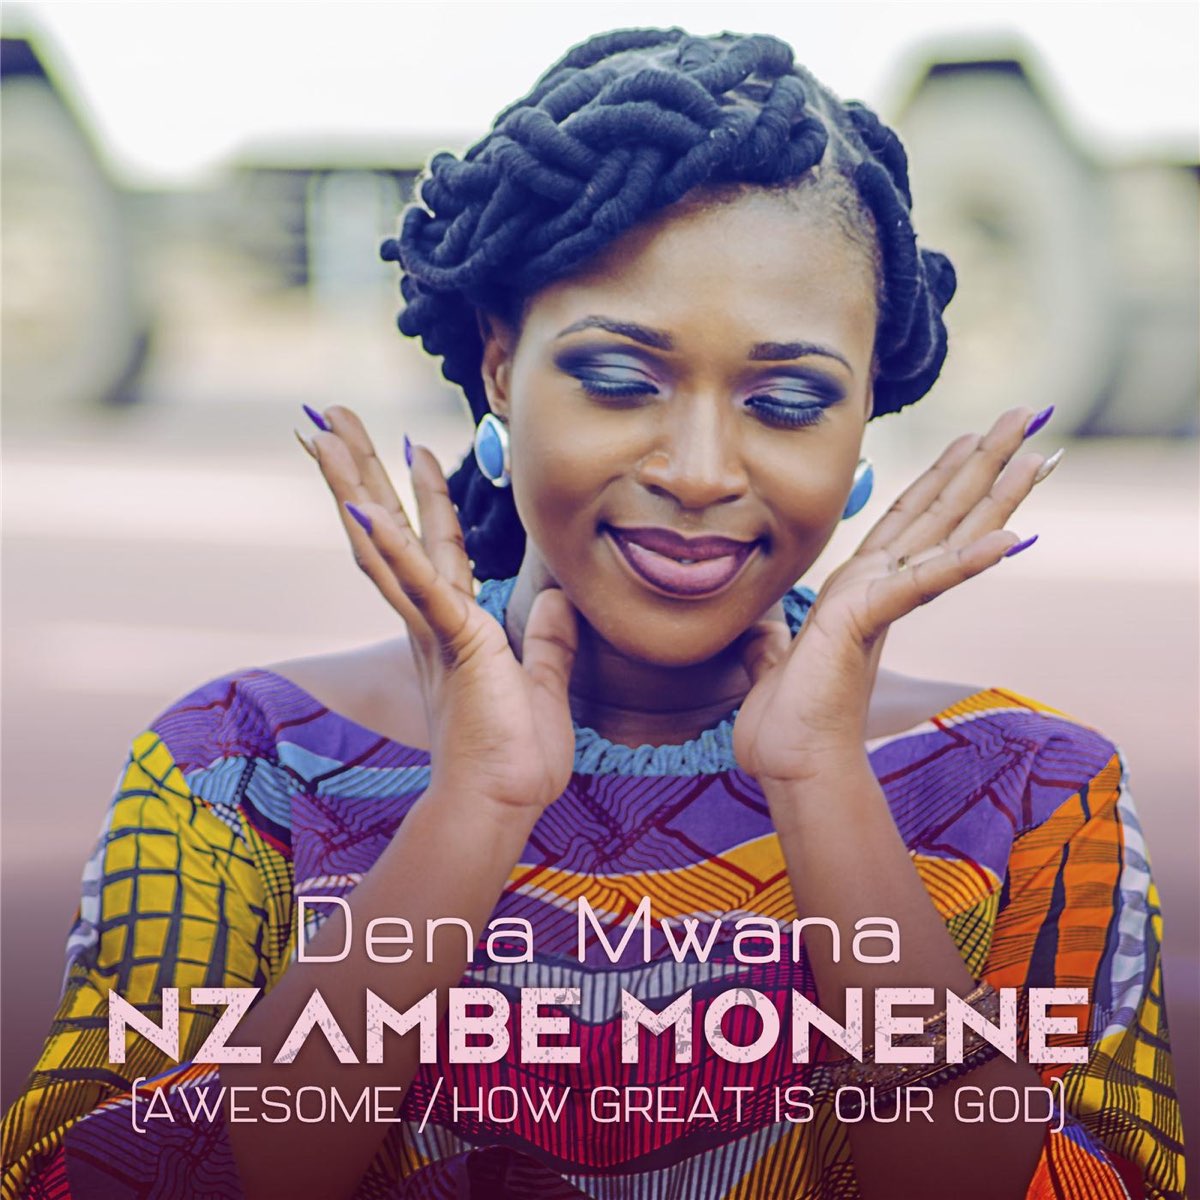 Nzambe Monene (Awesome / How Great Is Our God) - EP by Dena Mwana on Apple  Music